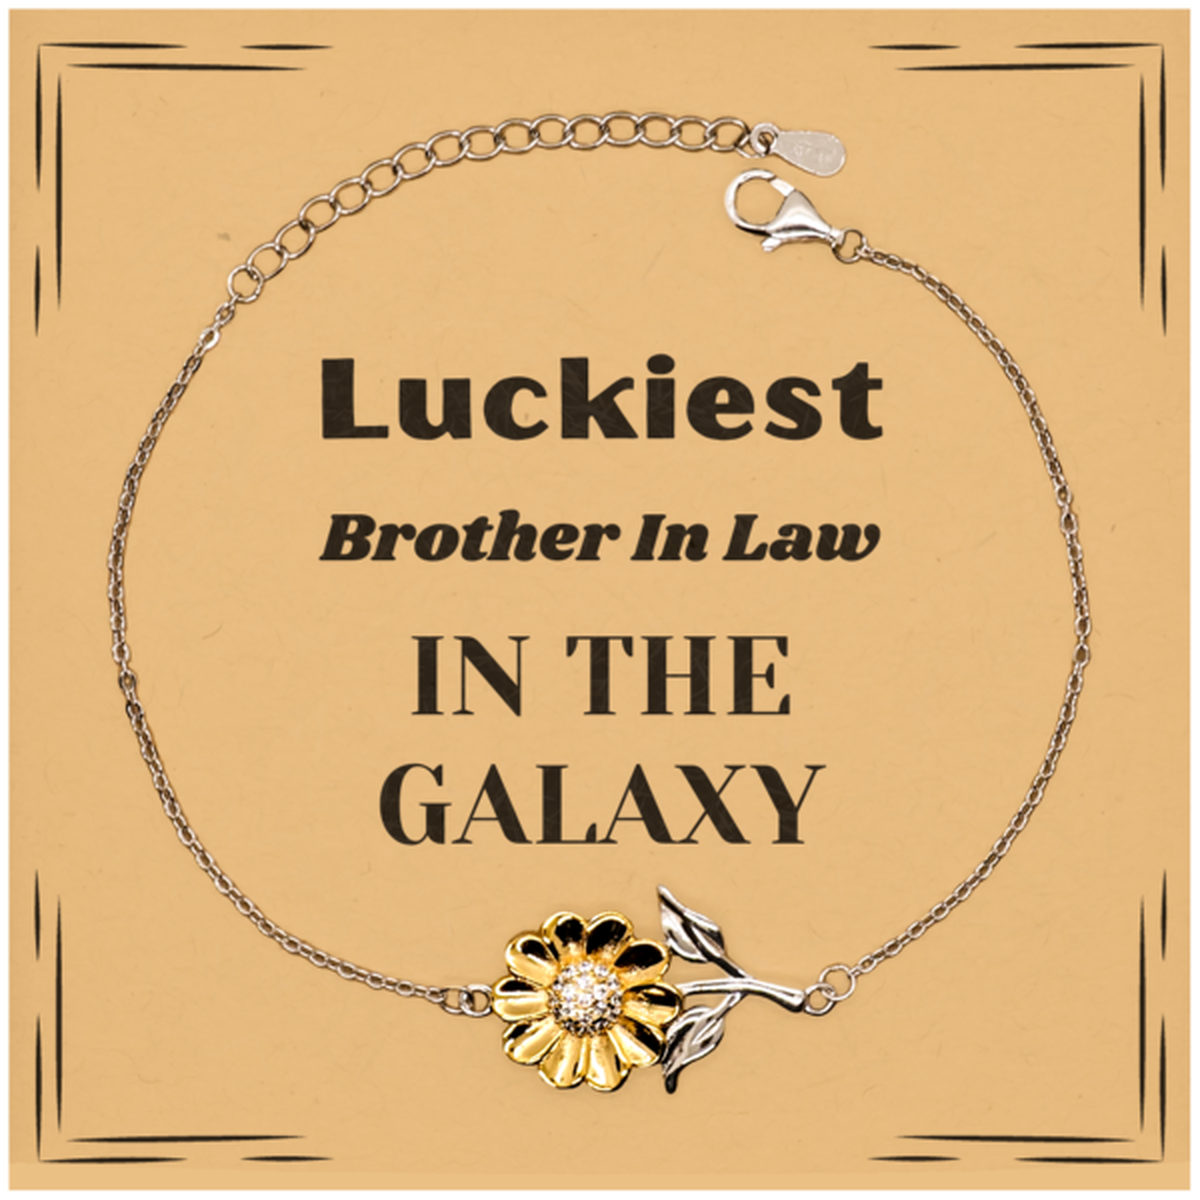 Luckiest Brother In Law in the Galaxy, To My Brother In Law Message Card Gifts, Christmas Brother In Law Sunflower Bracelet Gifts, X-mas Birthday Unique Gifts For Brother In Law Men Women